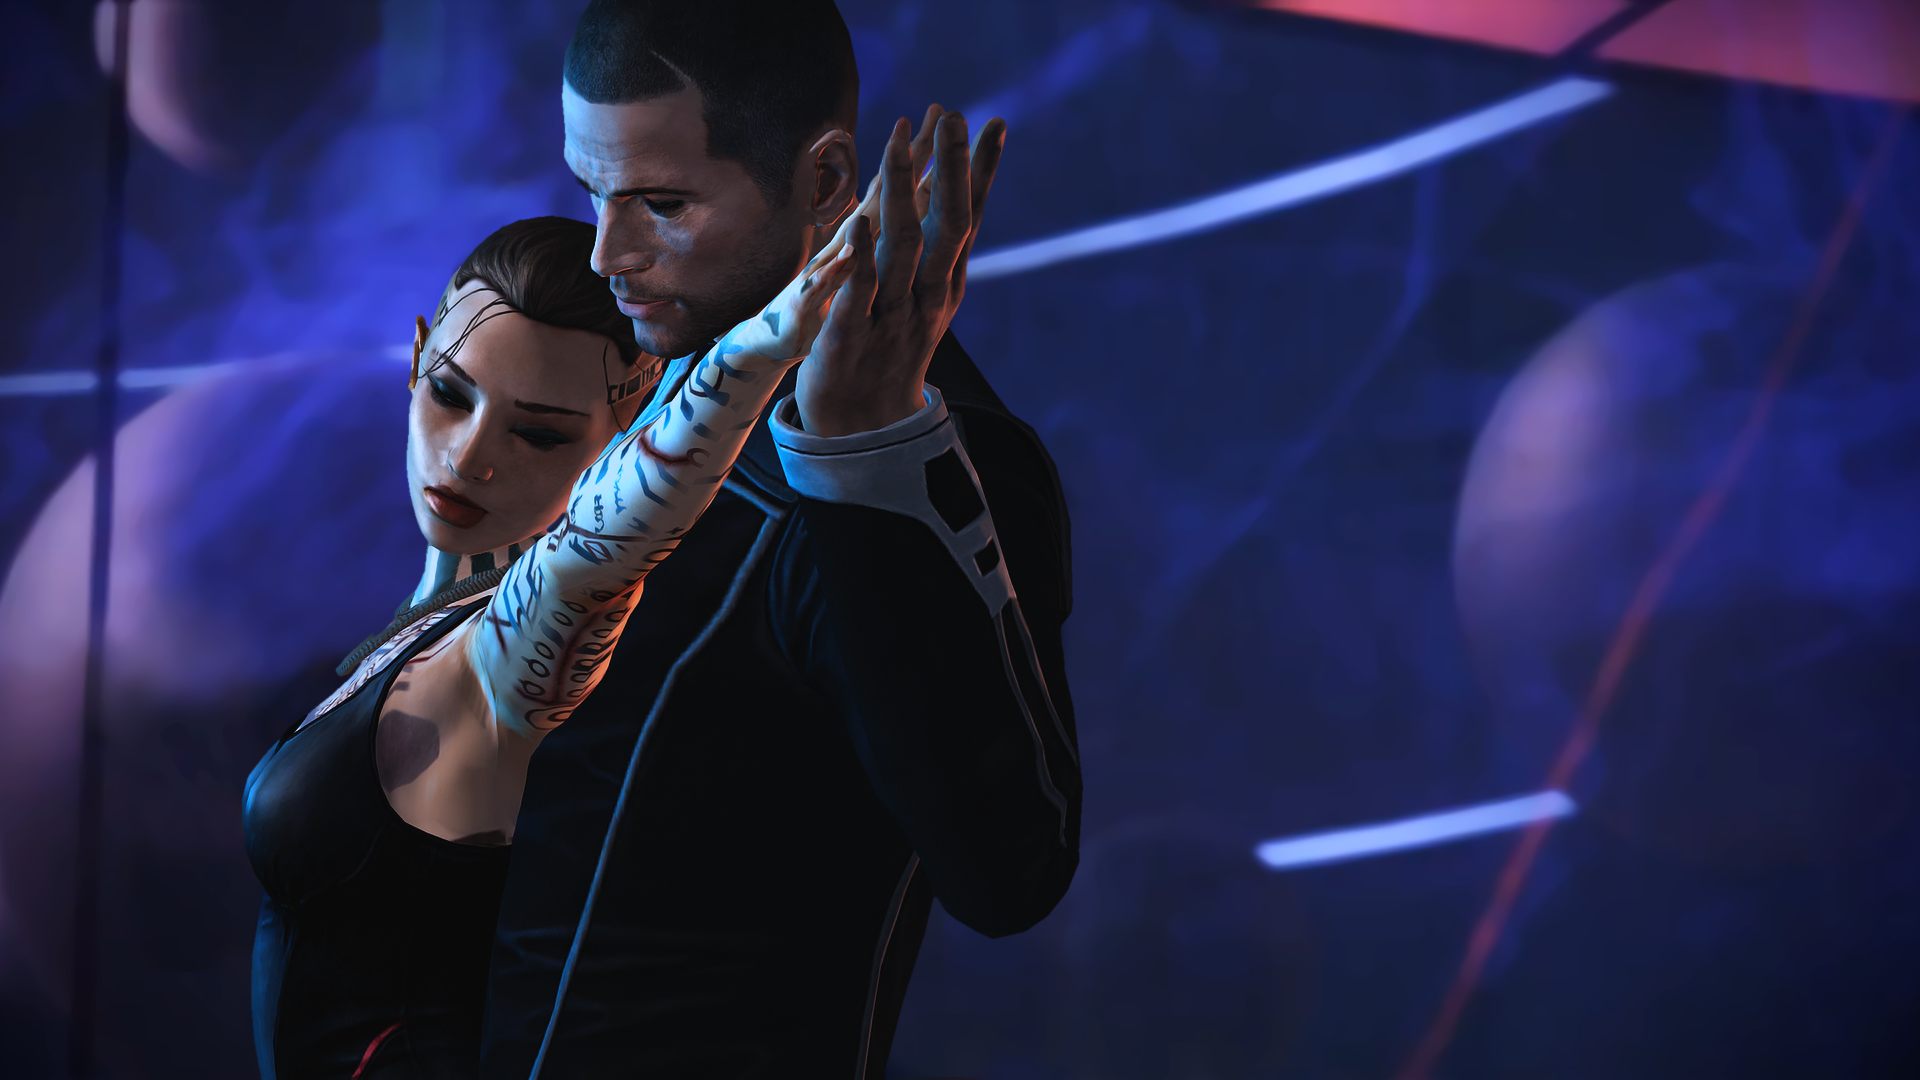 shepard_taking_jack_out_dancing__wallpaper__by_lovelymaiden-d6zytf2.png